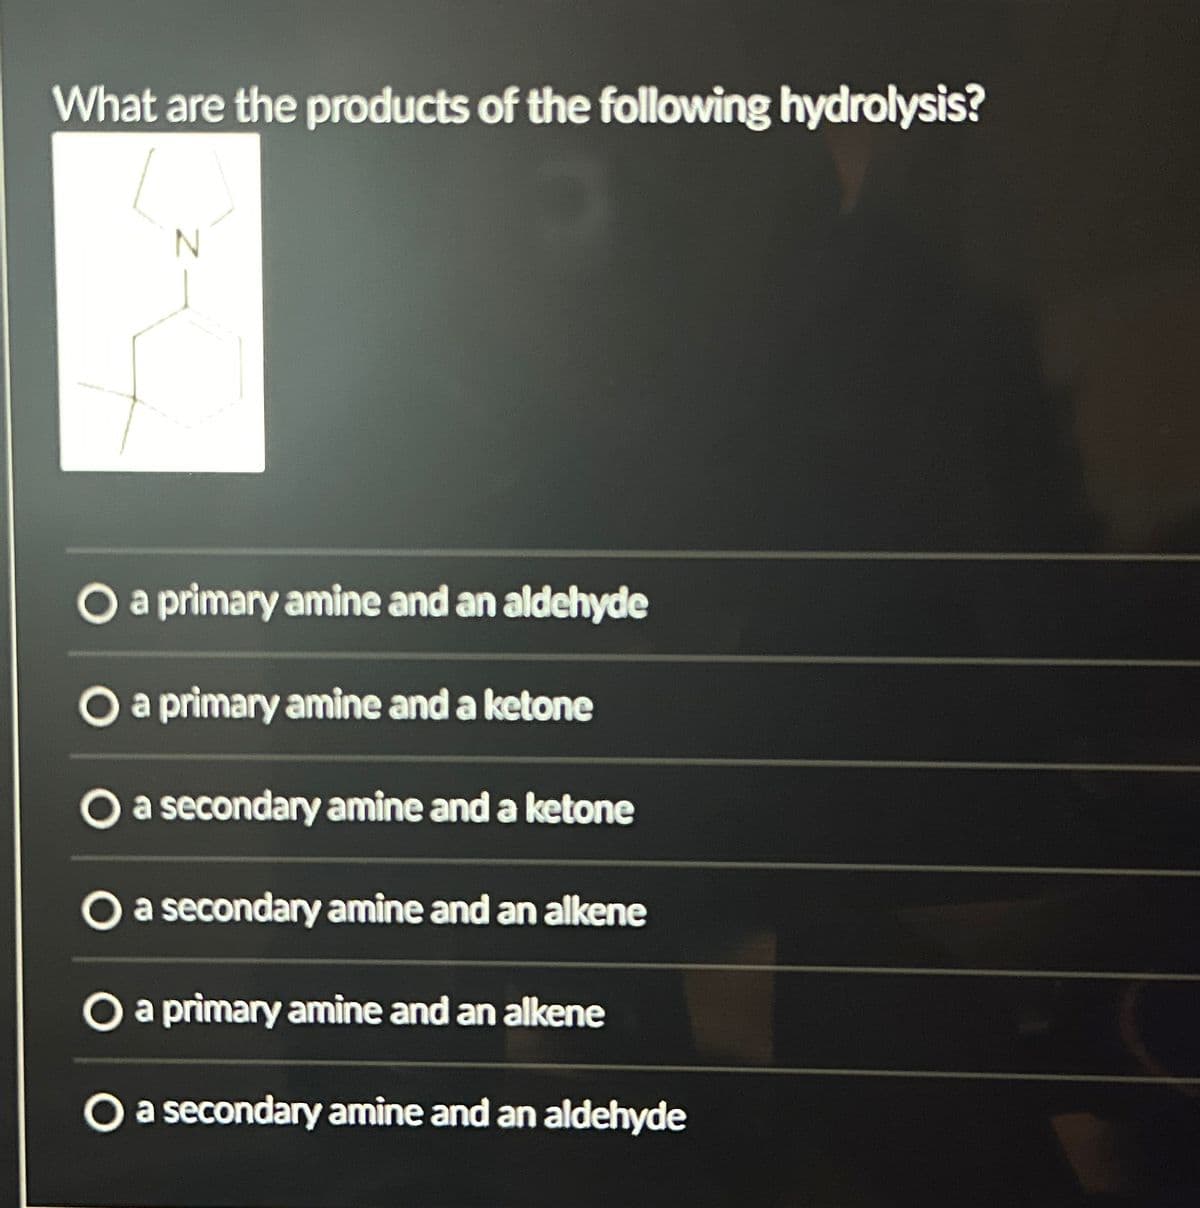 What are the products of the following hydrolysis?
a primary amine and an aldehyde
O a primary amine and a ketone
O a secondary amine and a ketone
O a secondary amine and an alkene
O a primary amine and an alkene
O a secondary amine and an aldehyde